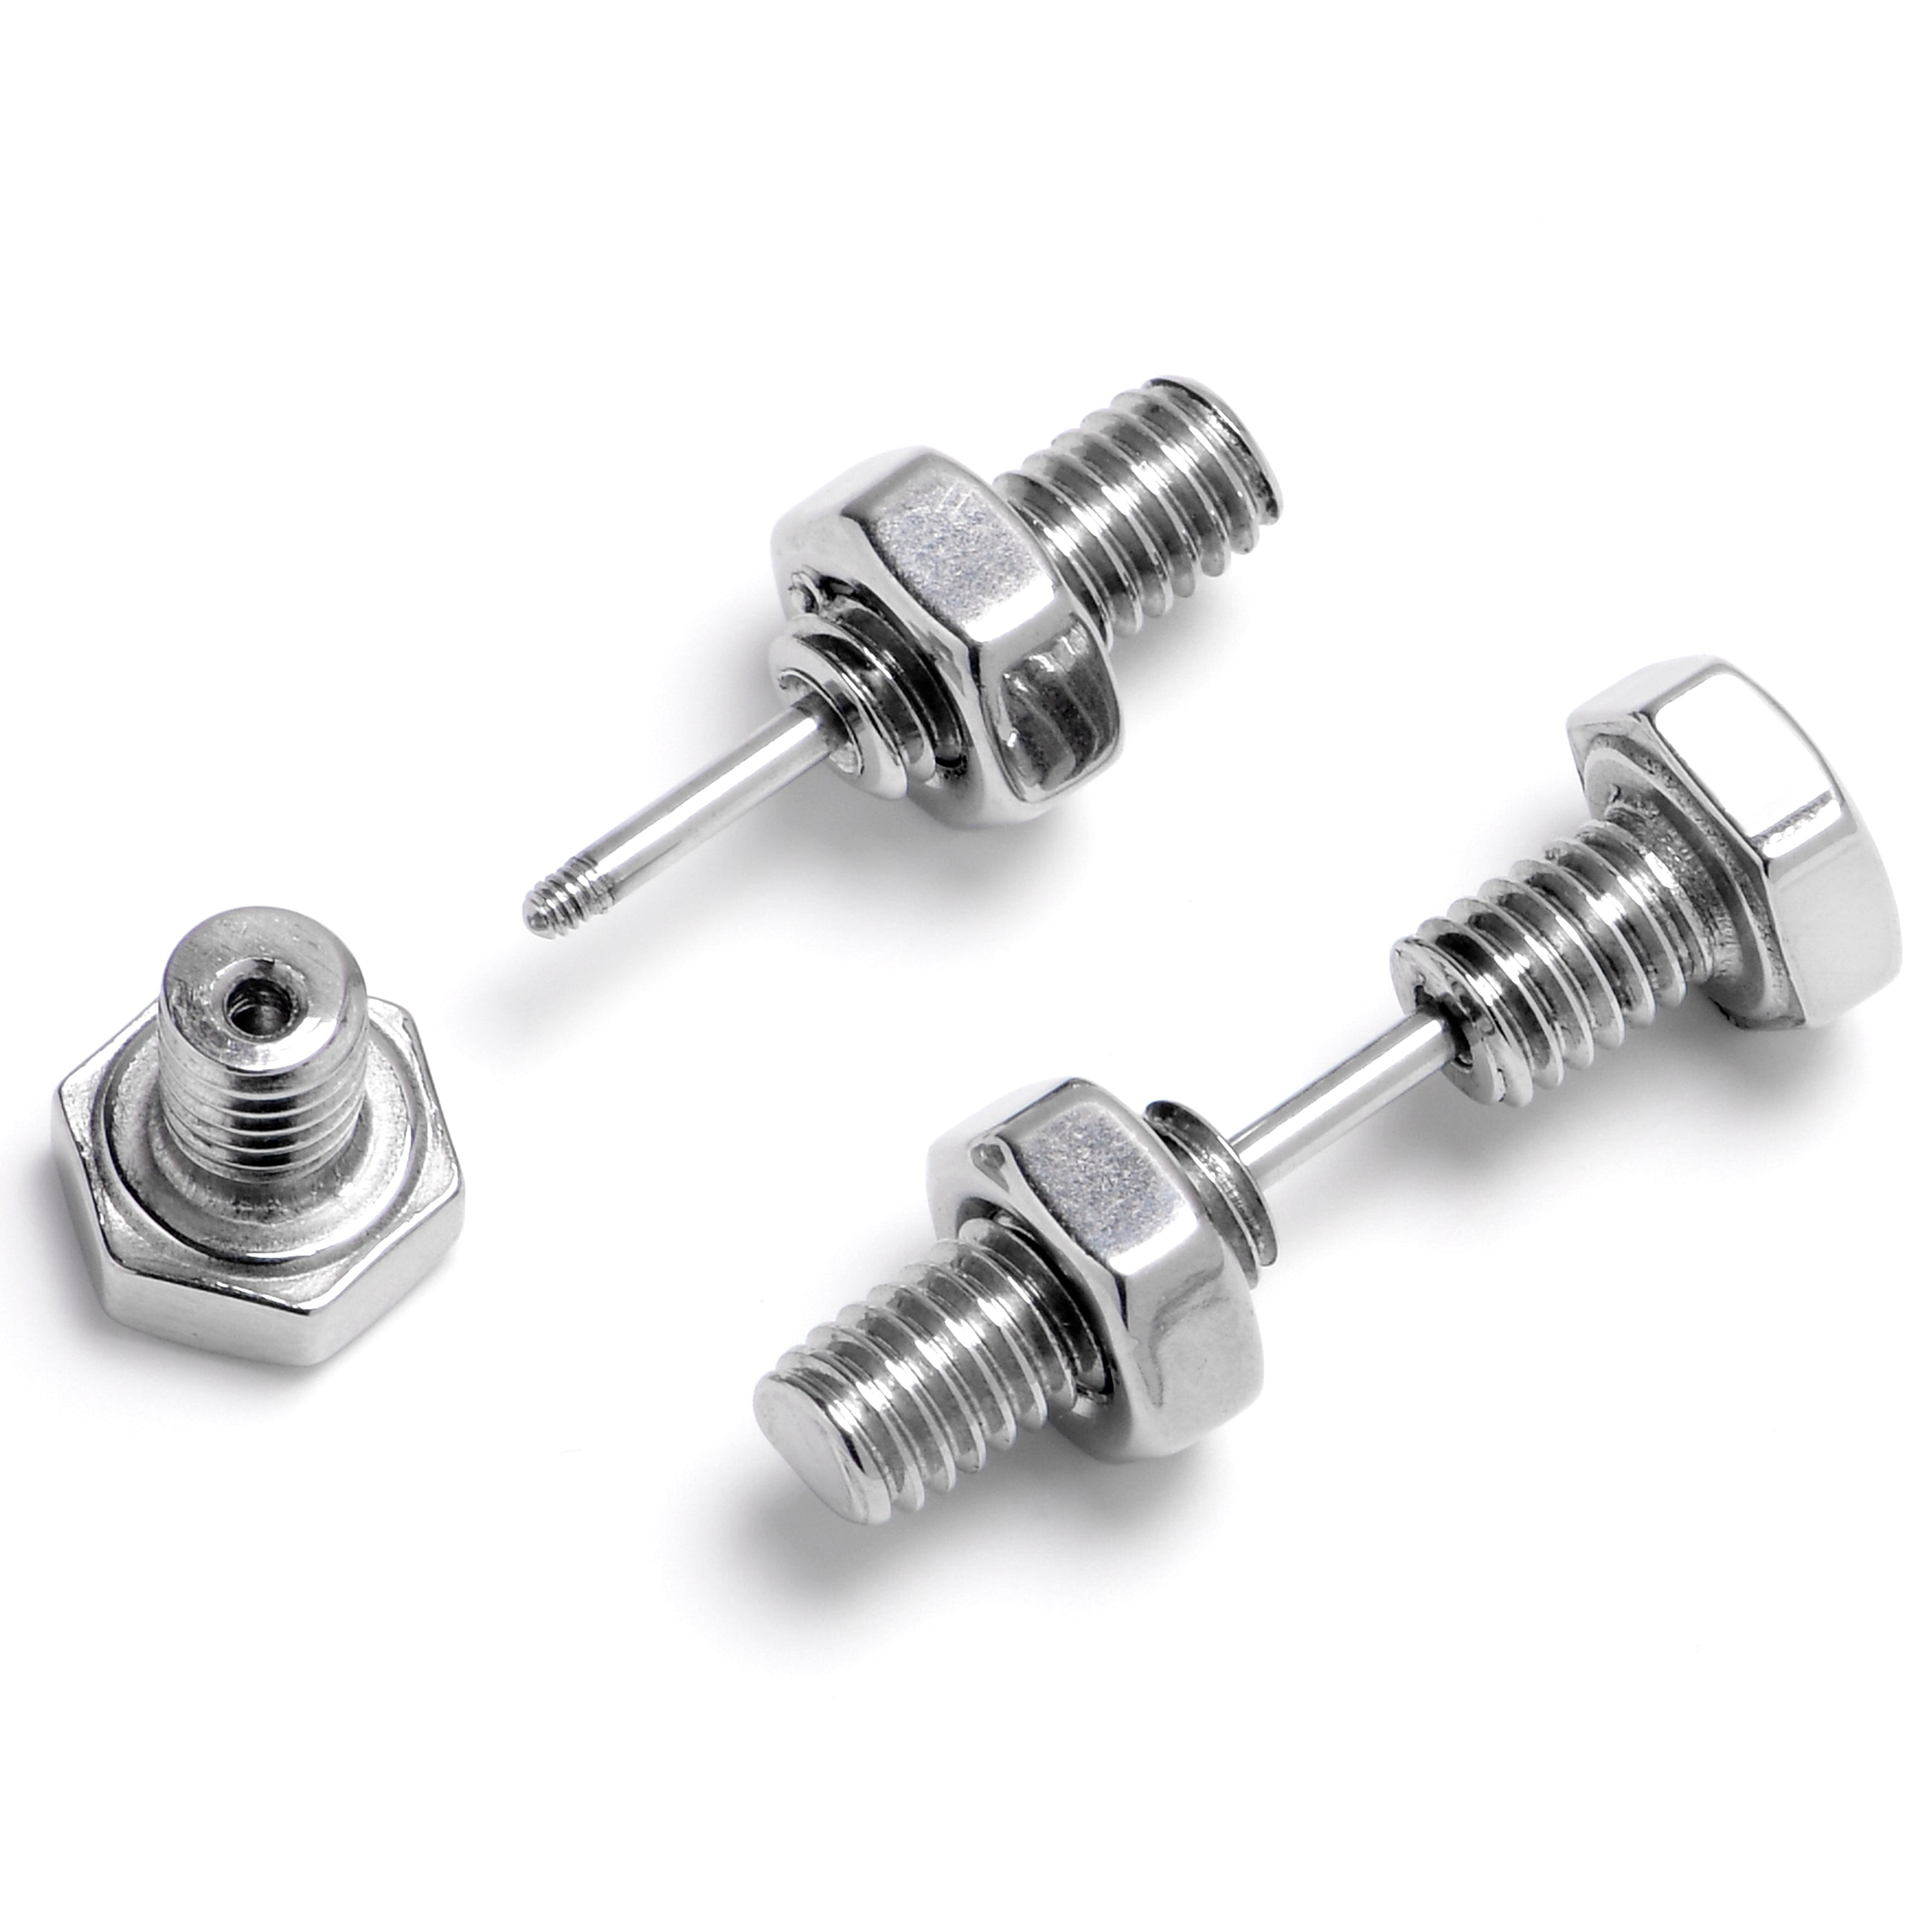 16 Gauge Optical Illusion Bolt Nuts And Bolts Cheater Plug Set